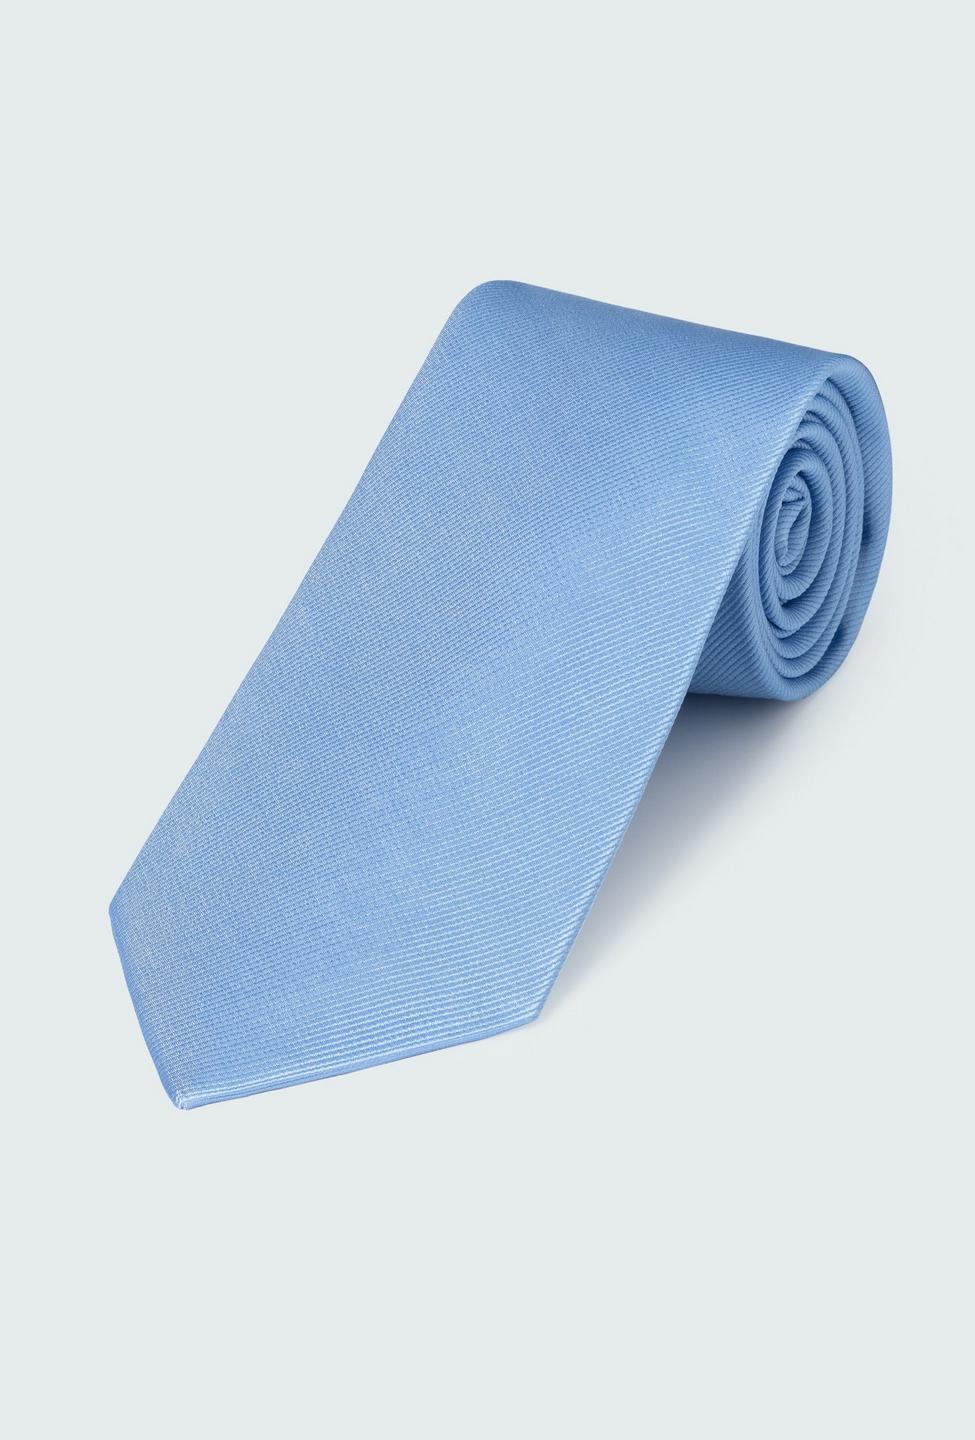 Blue tie - Solid Design from Indochino Collection